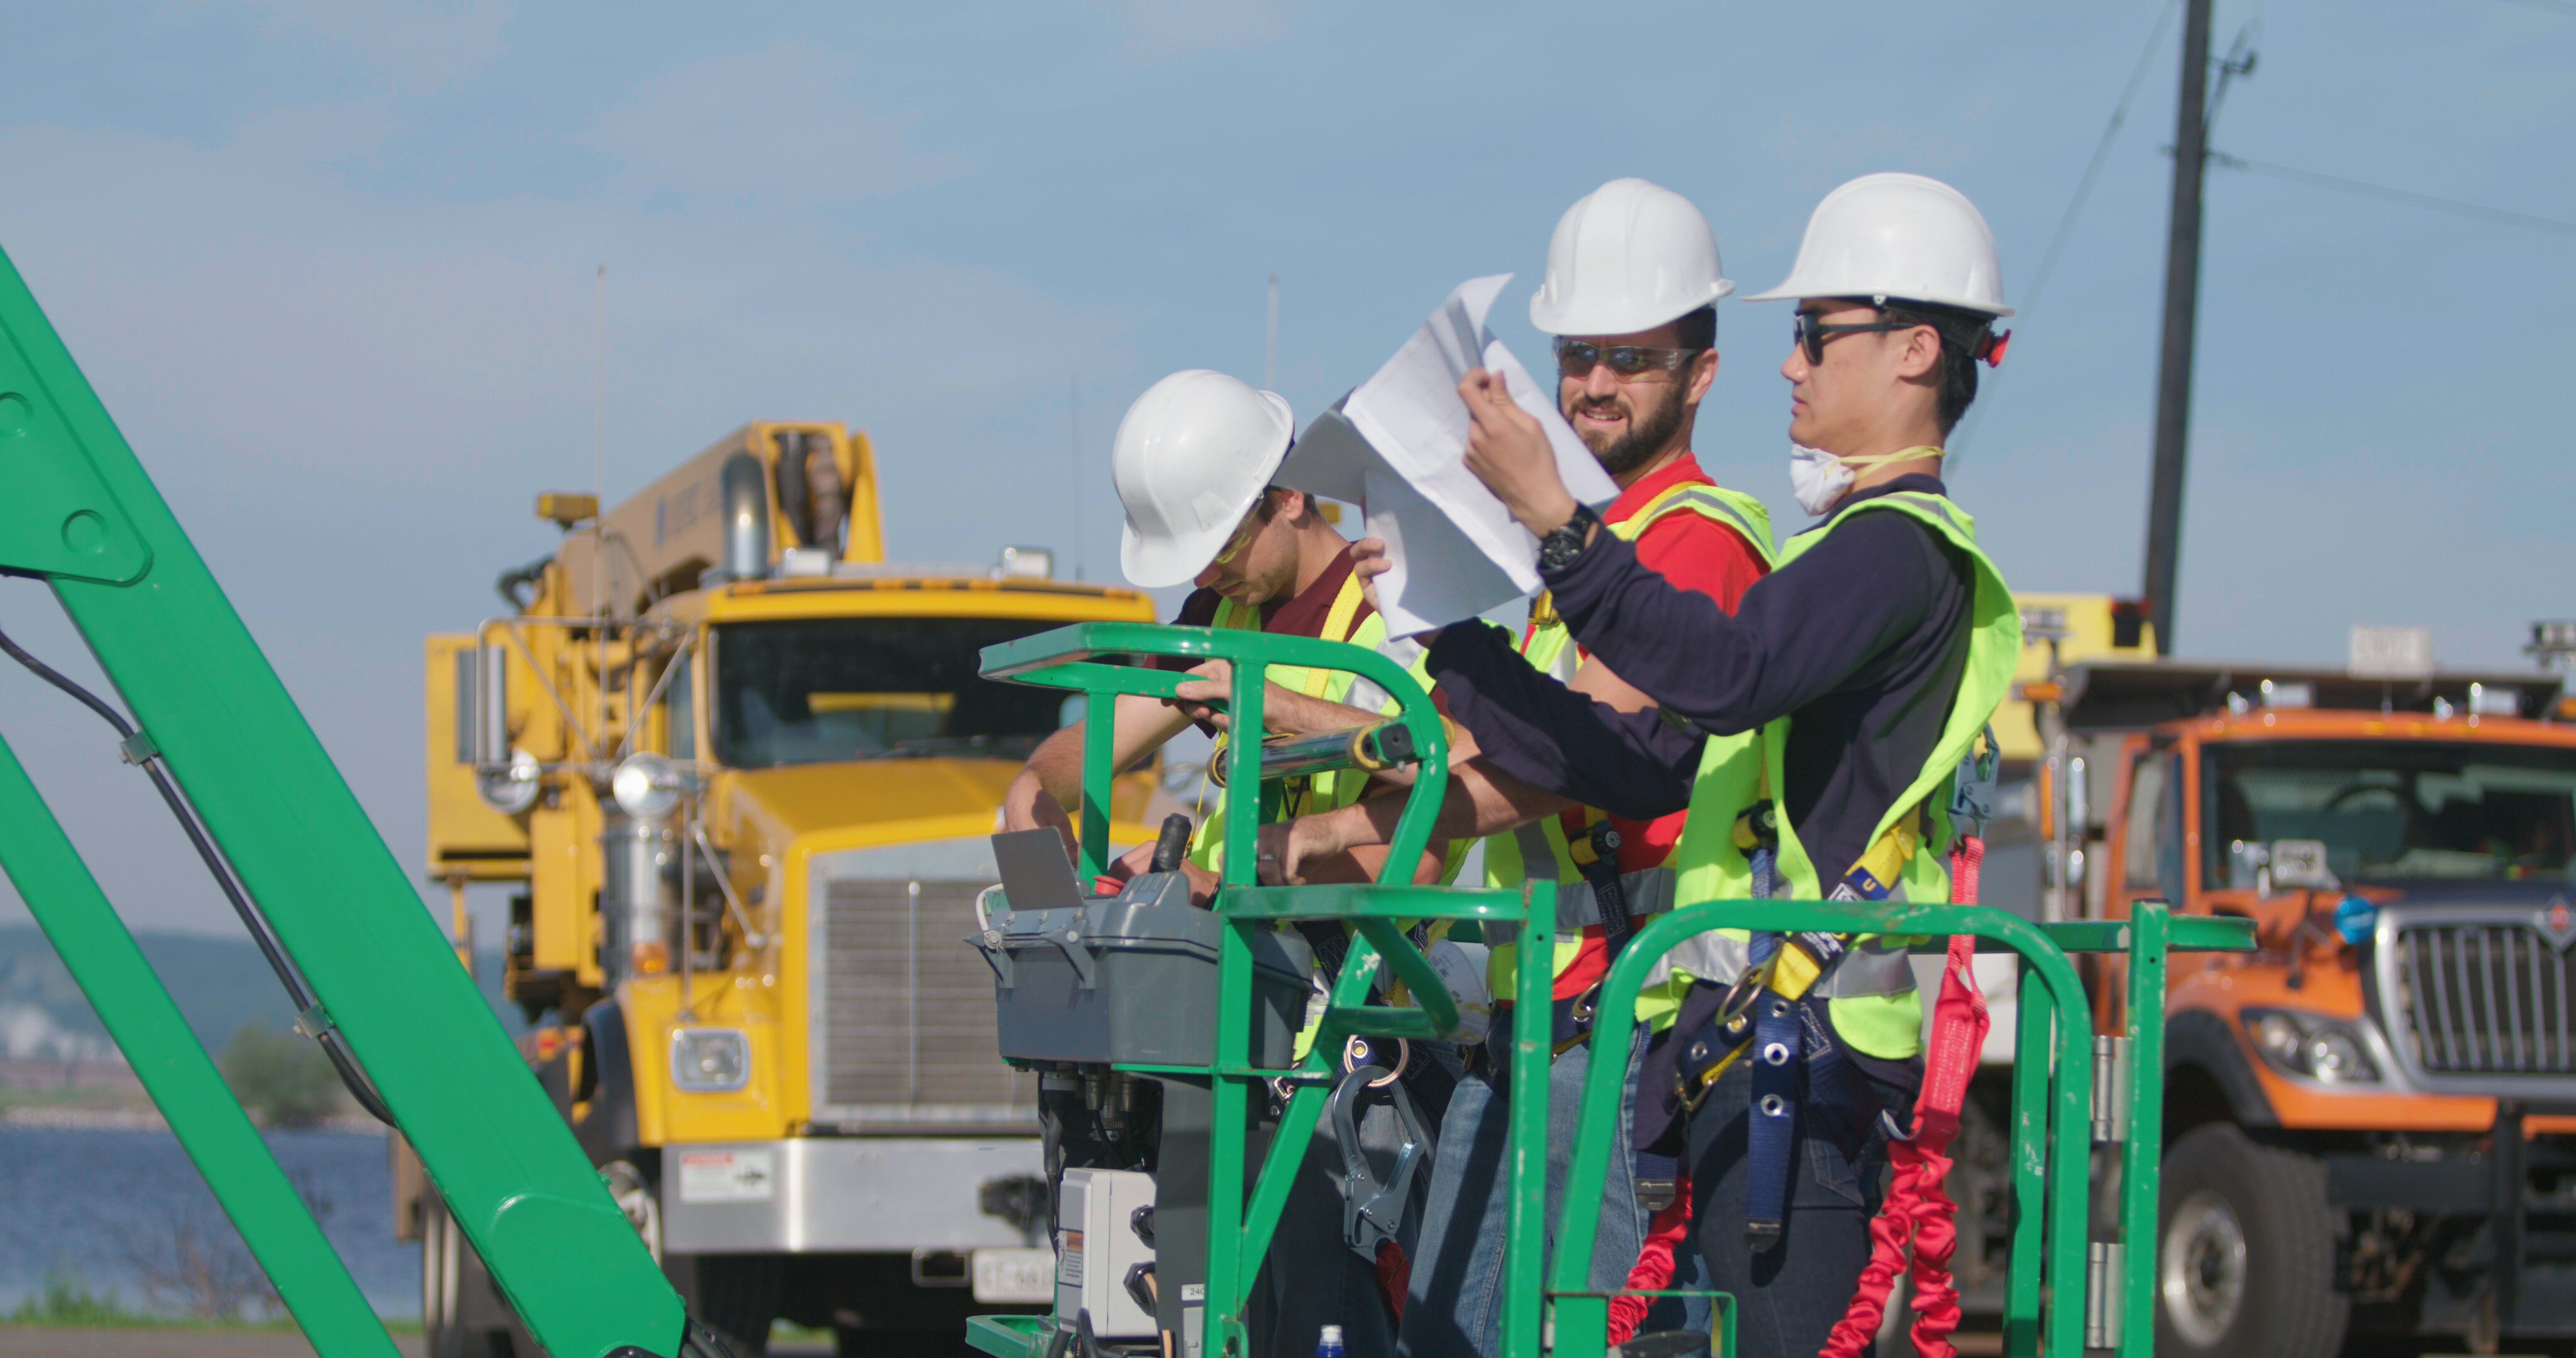 Two men, wearing hard hats and vests, on a construction lift looking at a piece of paper.